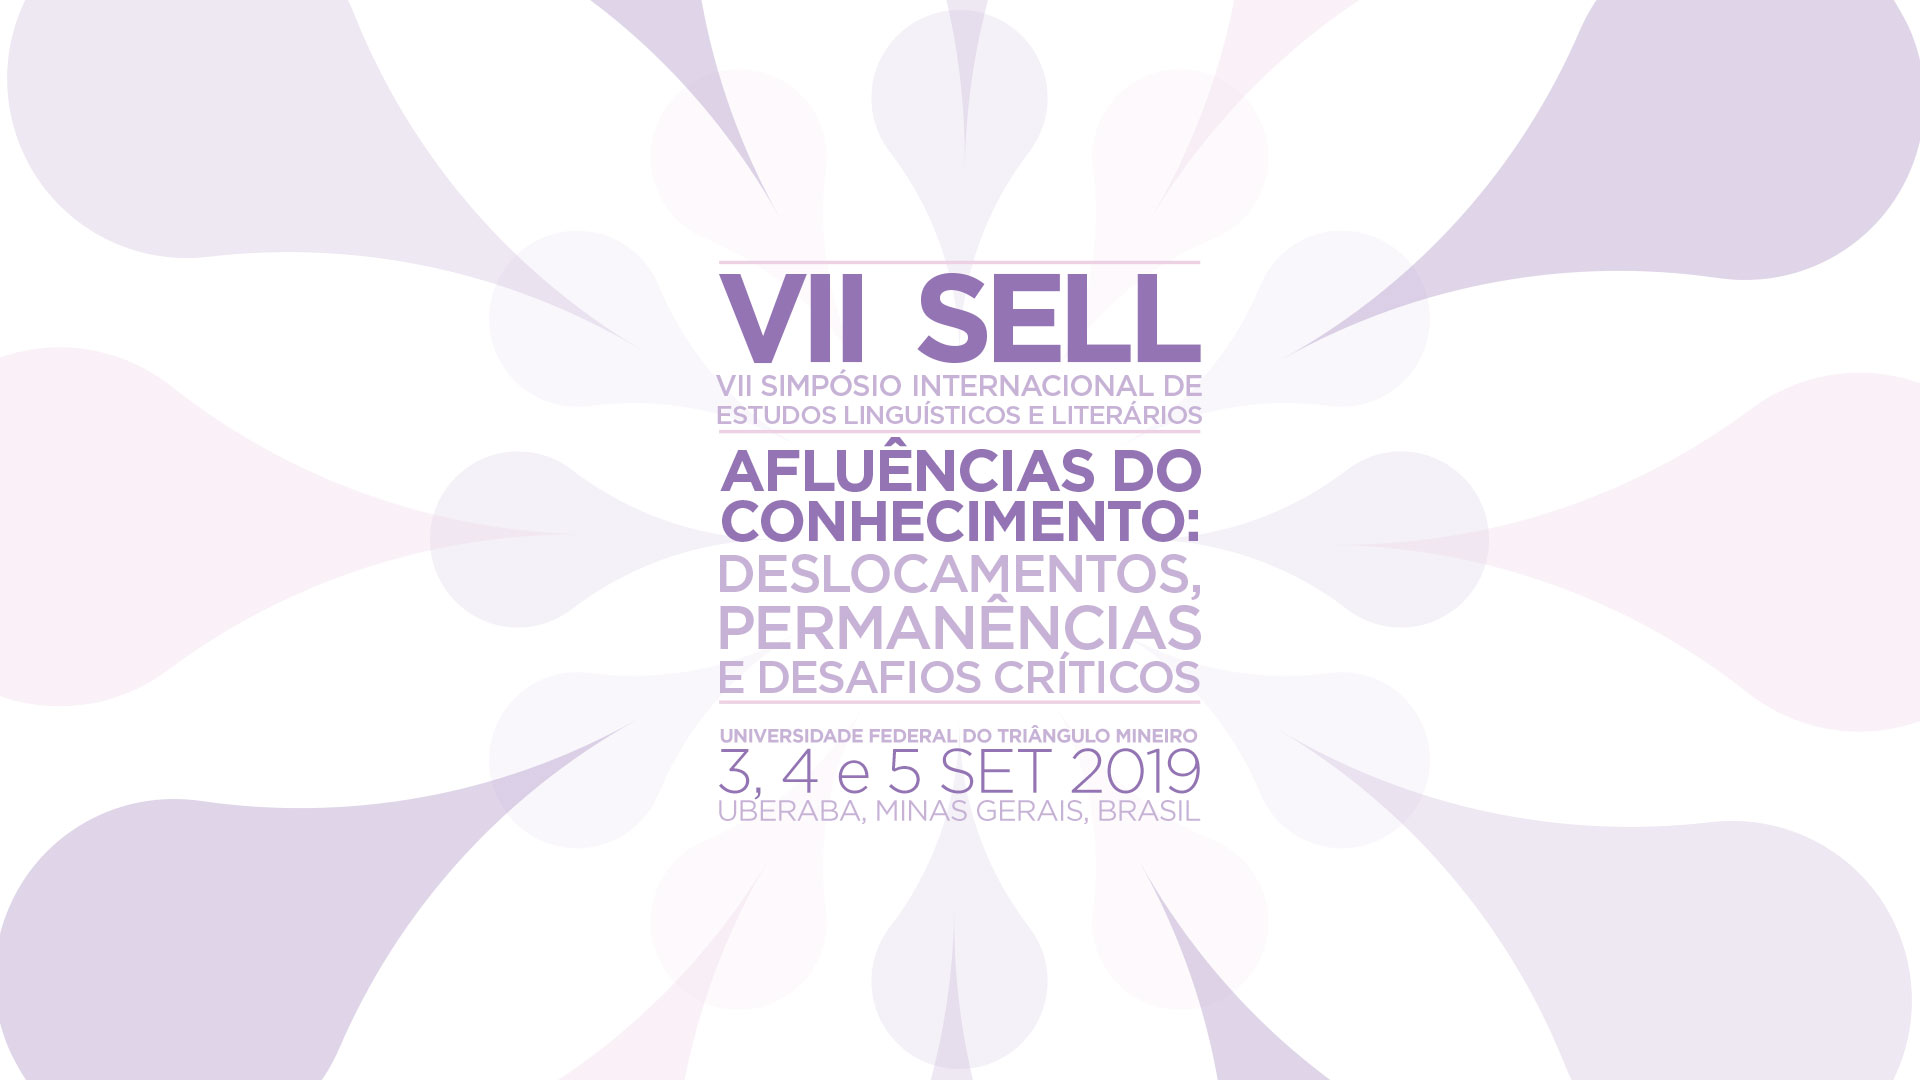 VII SELL 2019